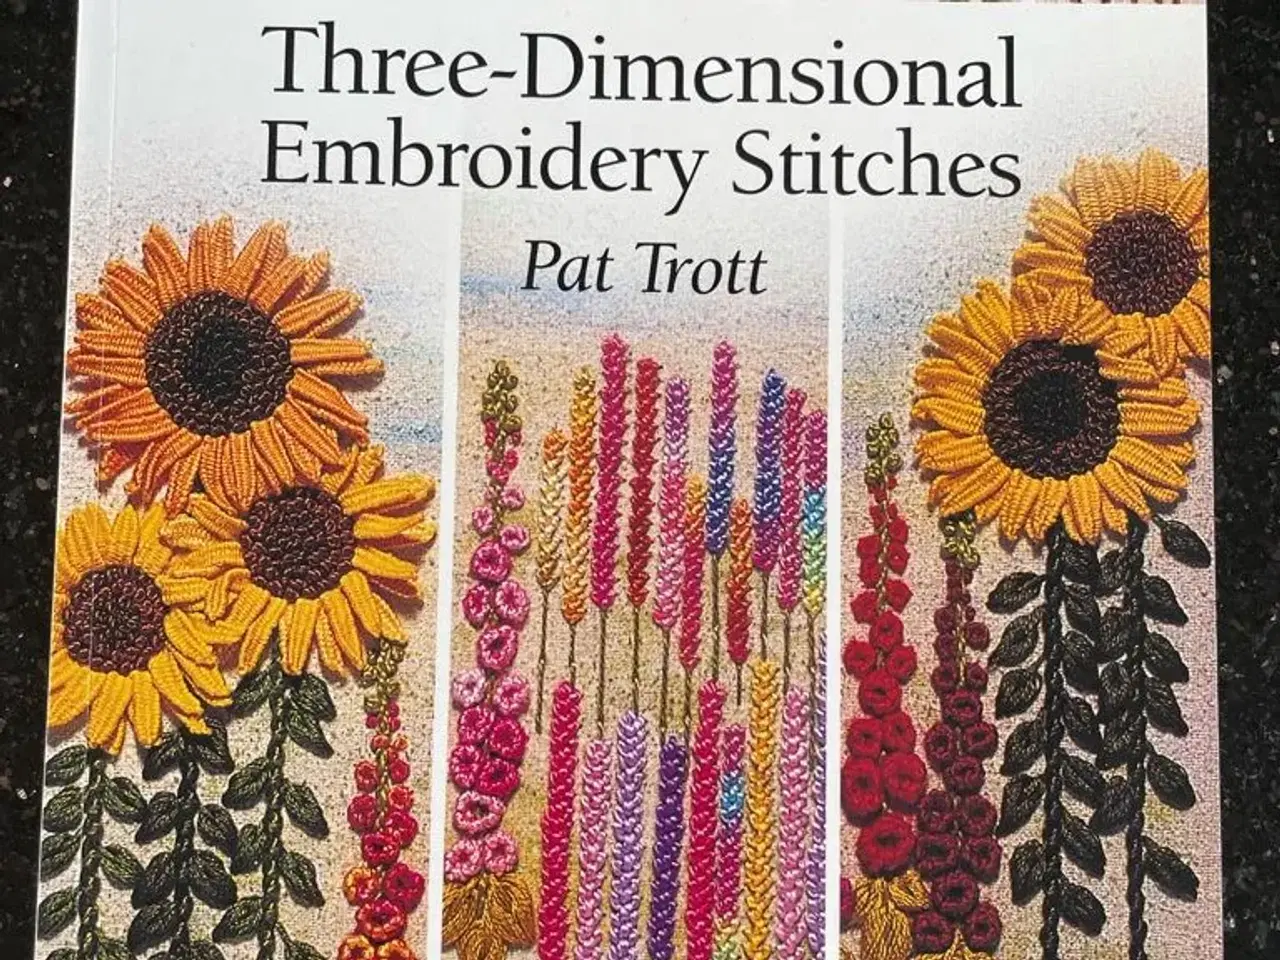 Billede 1 - Three-Dimensional Embroidery Stitches